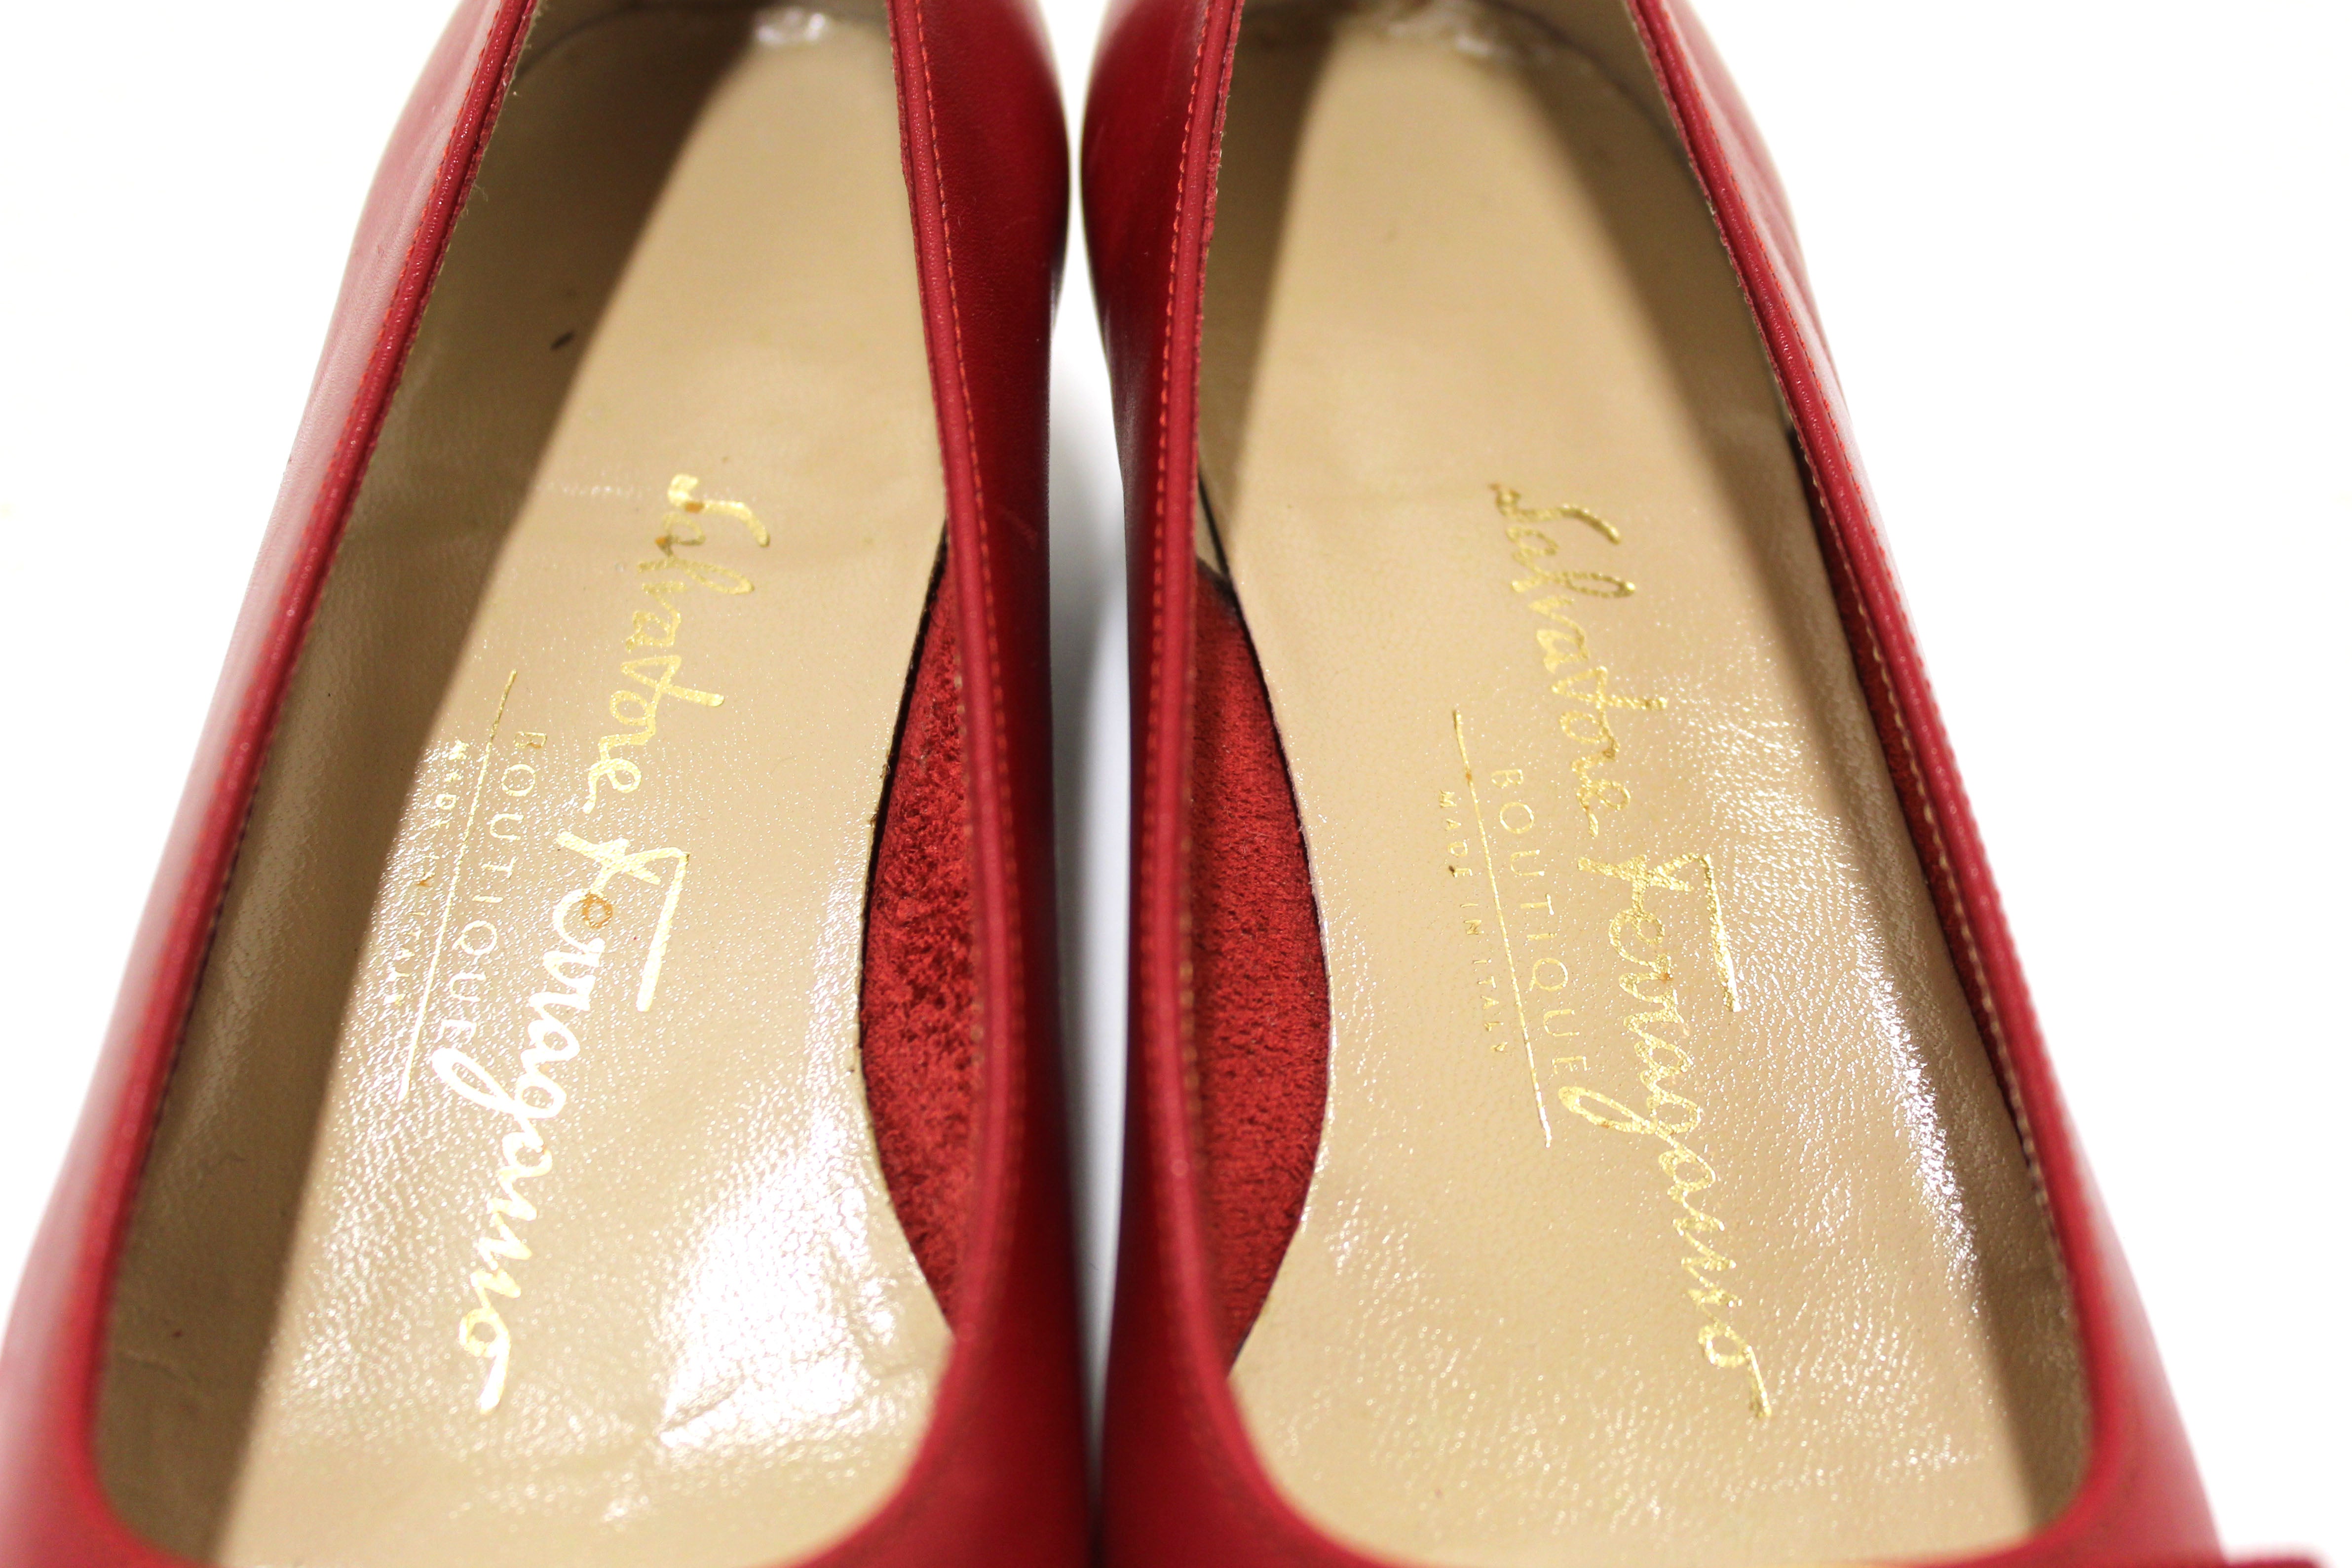 Authentic Salvatore Ferragamo Calfskin Red Leather Kitten Heel with Bow Size 6B